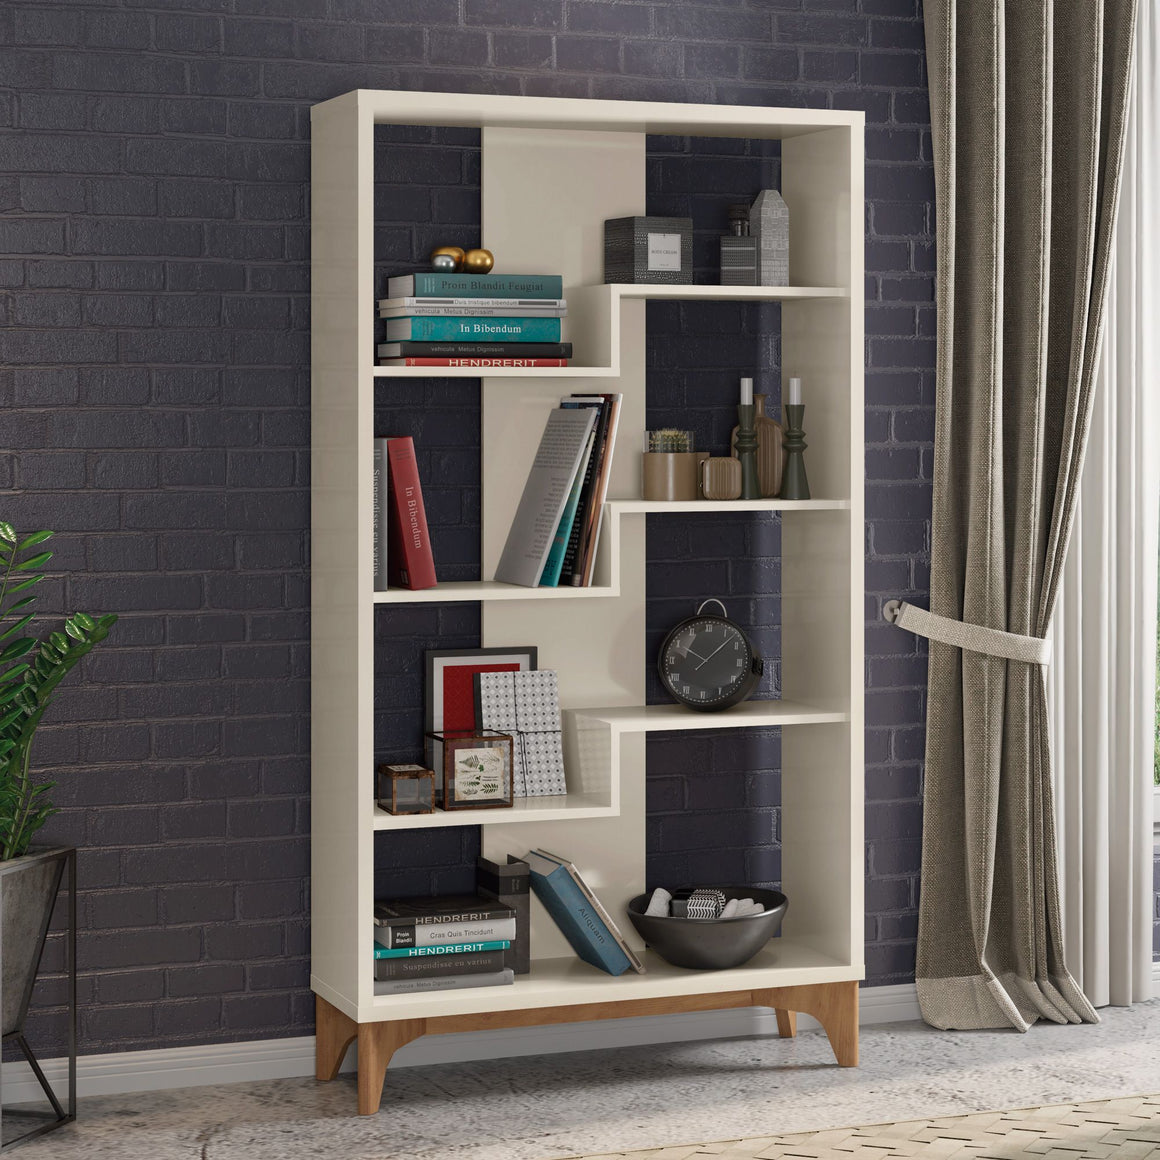 Gowanus Geometric Modern Bookcase with 4 Shelves in Off White